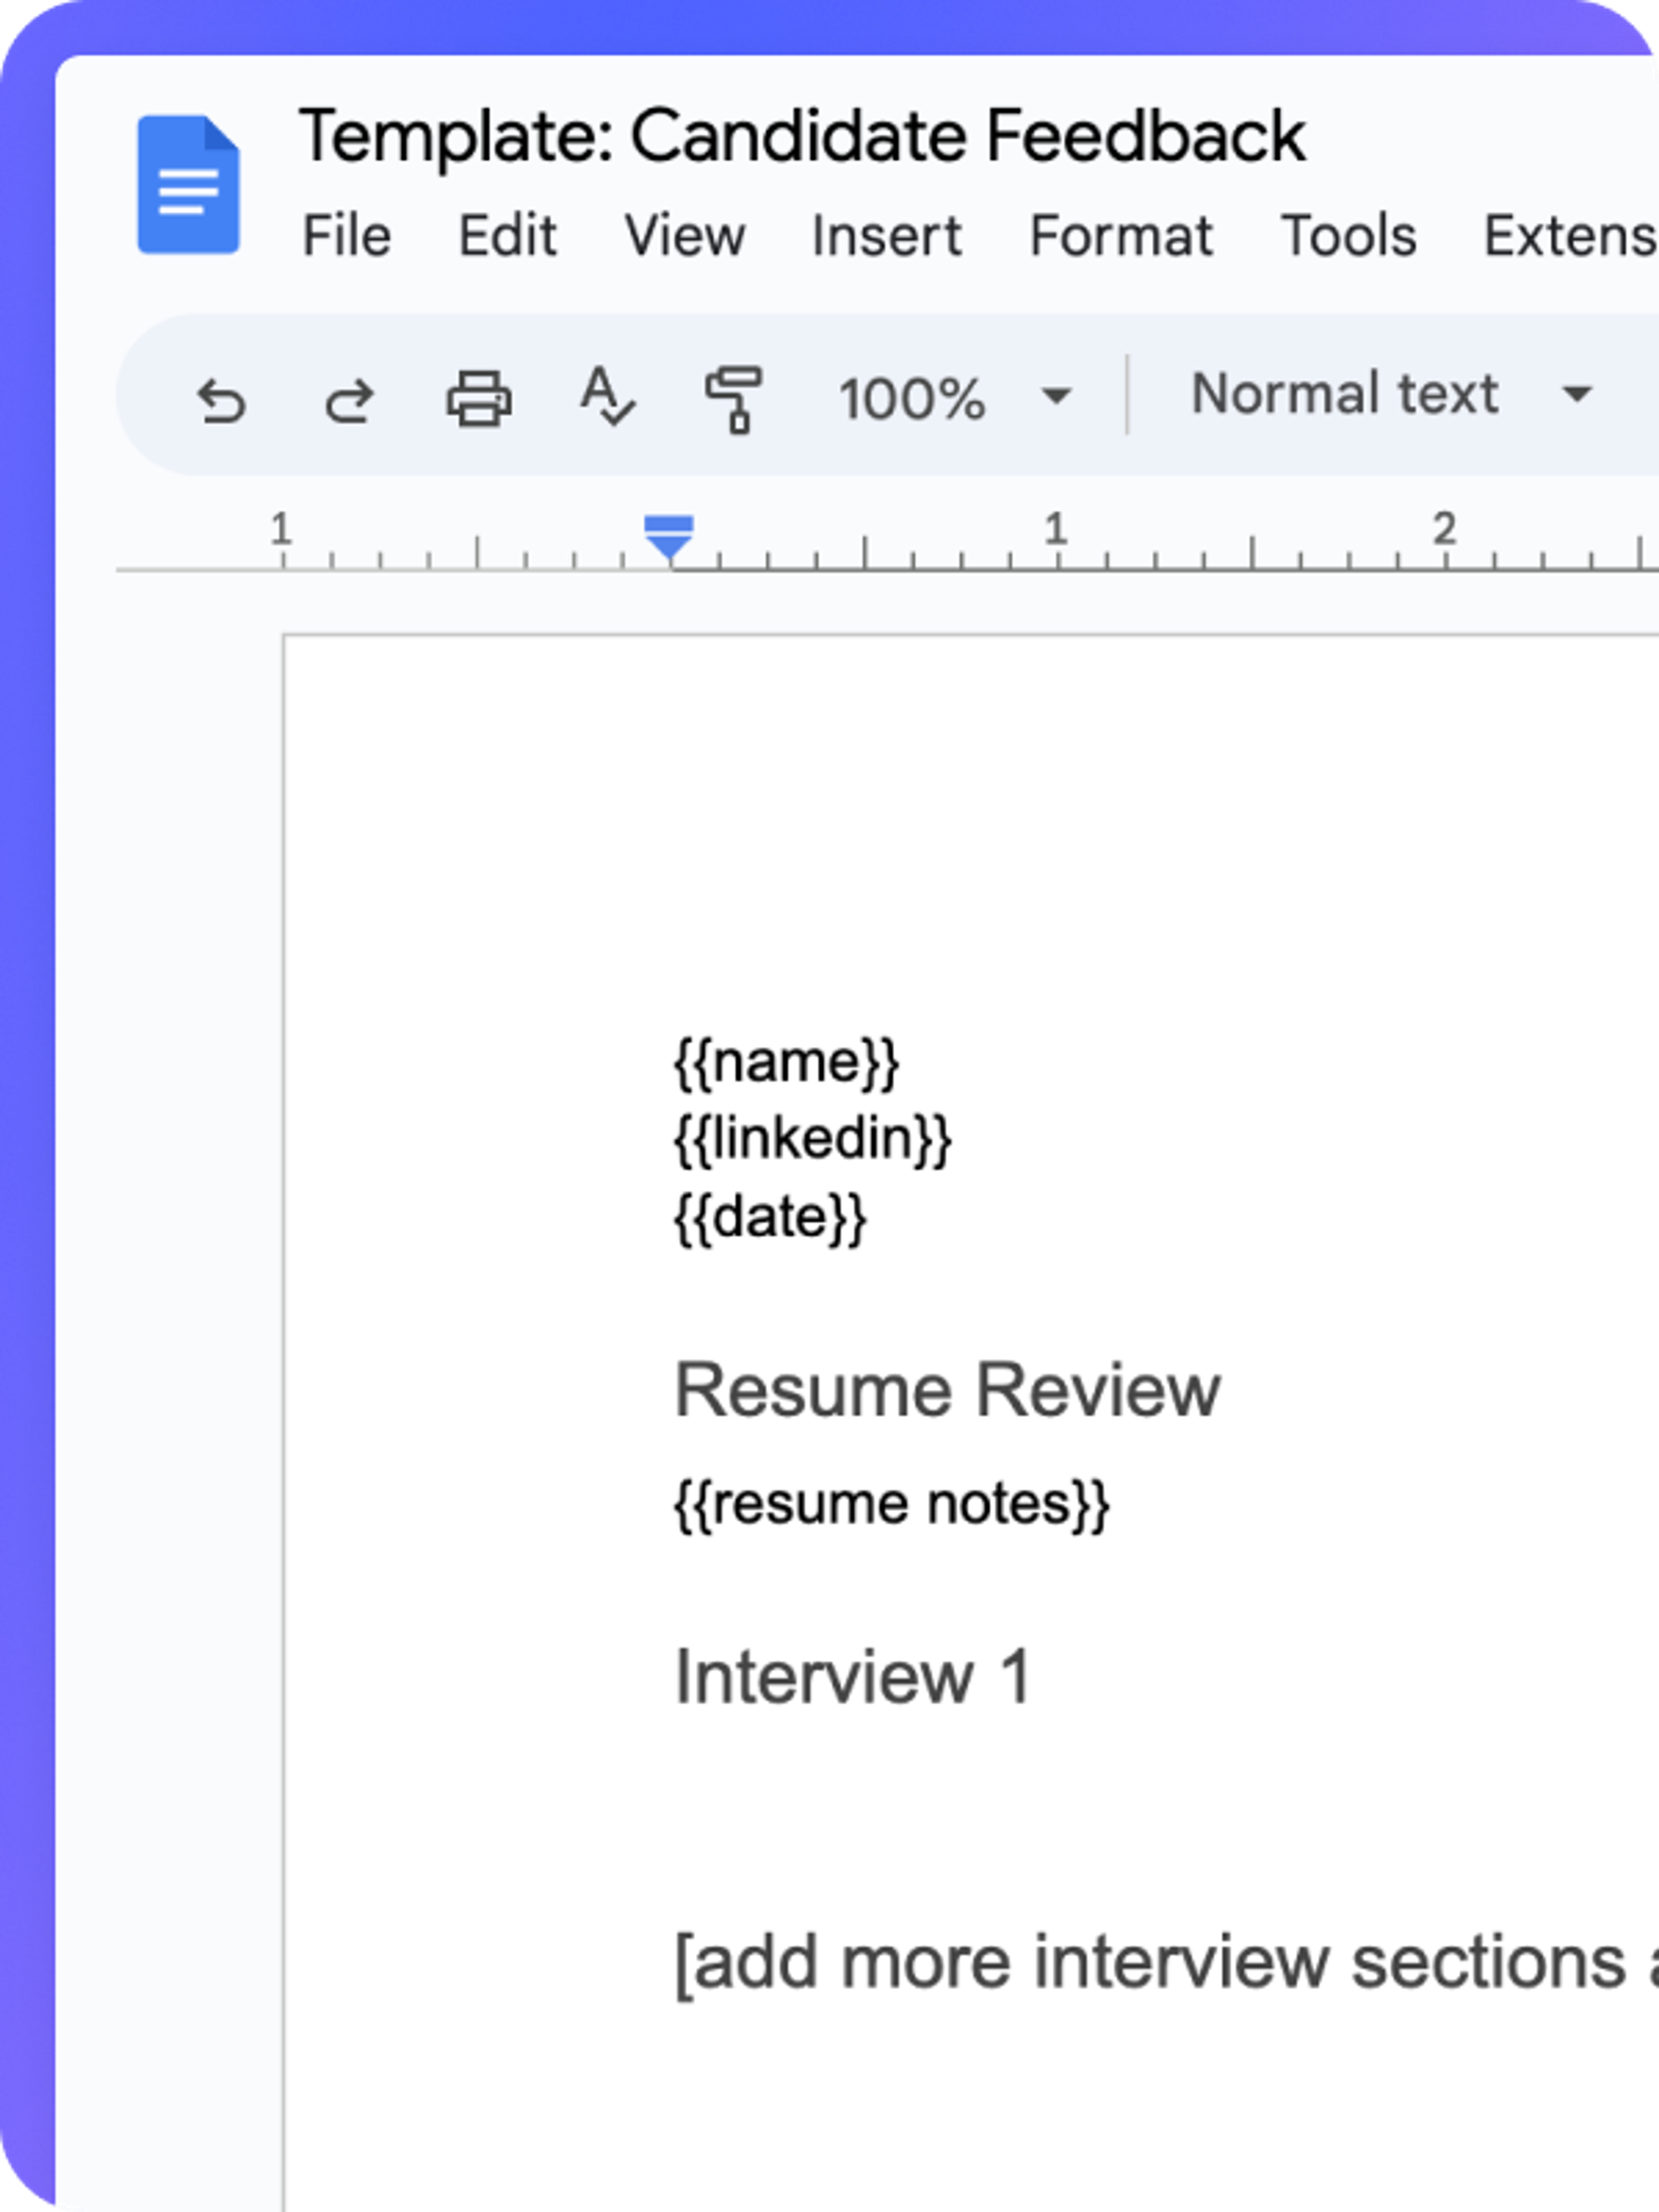 Step 2: Create a Notes Doc & Send an Interview Invitation